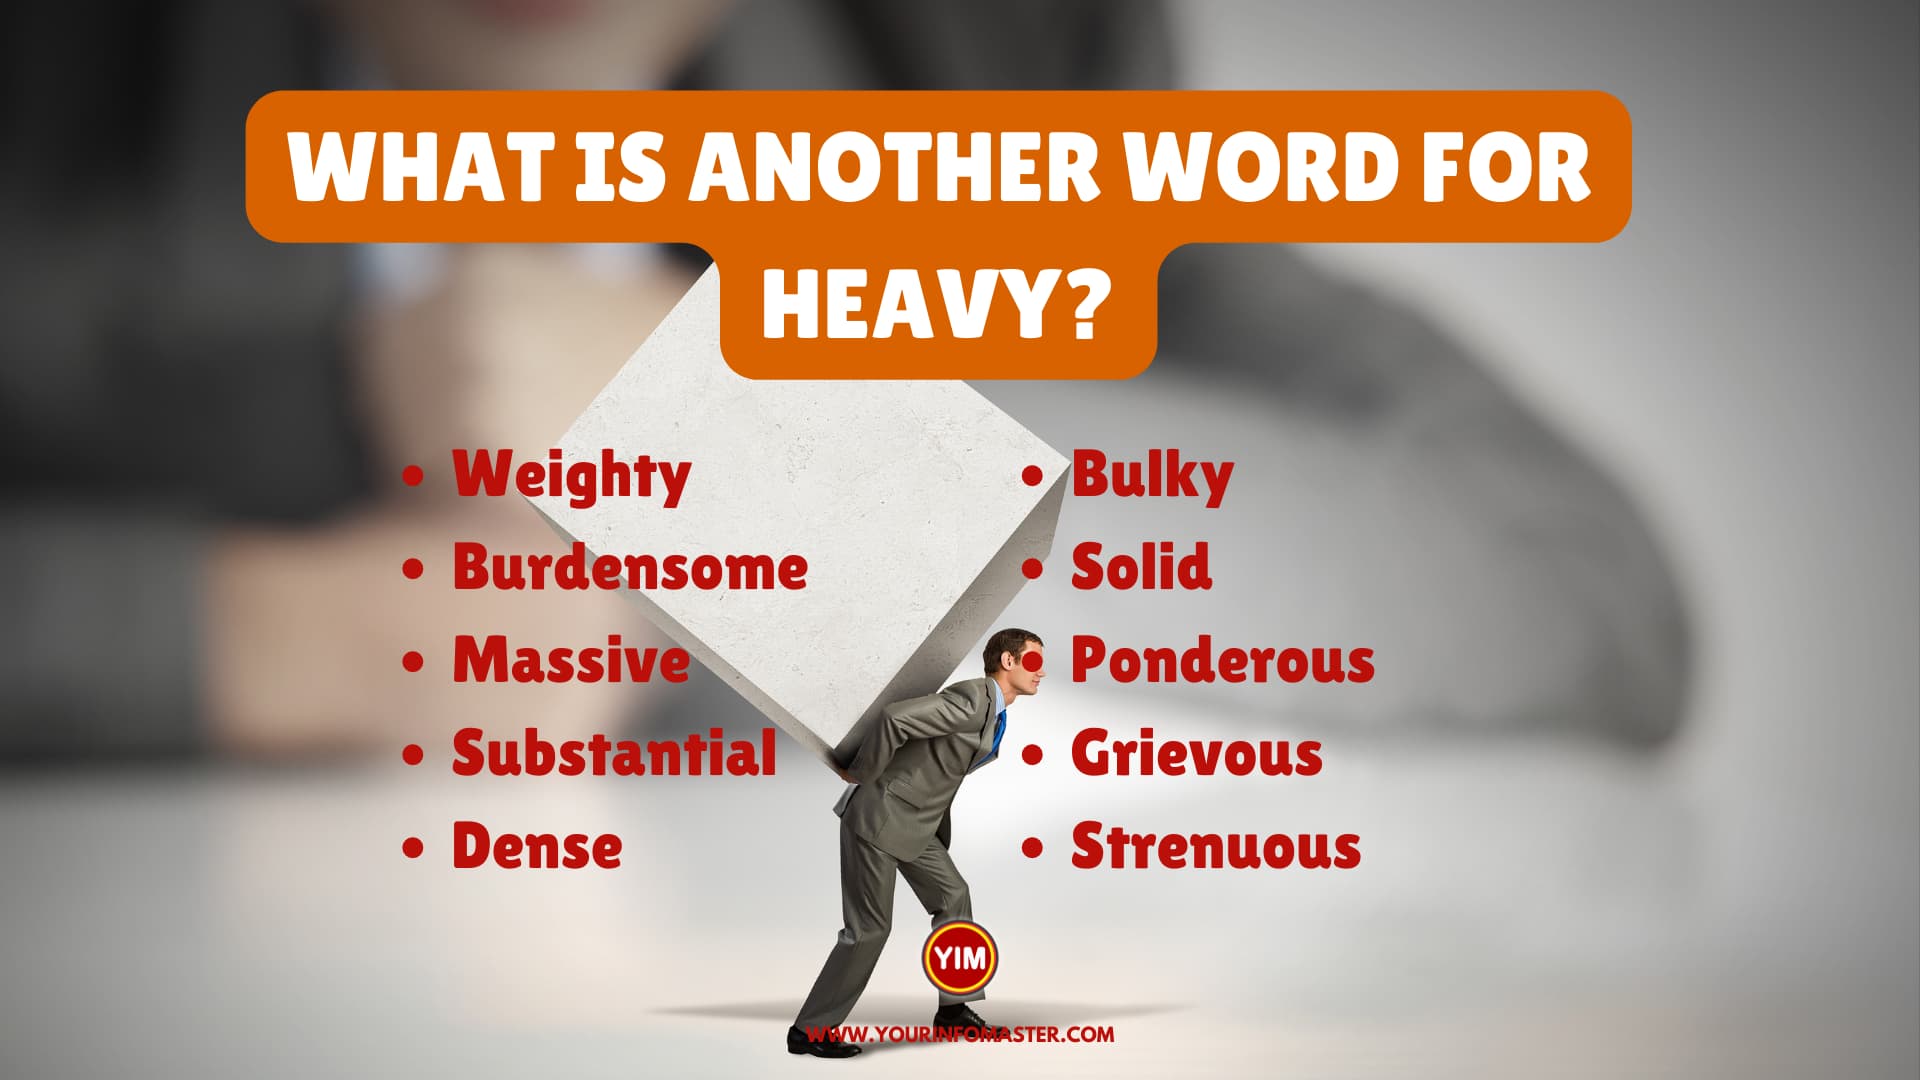 What is another word for Heavy